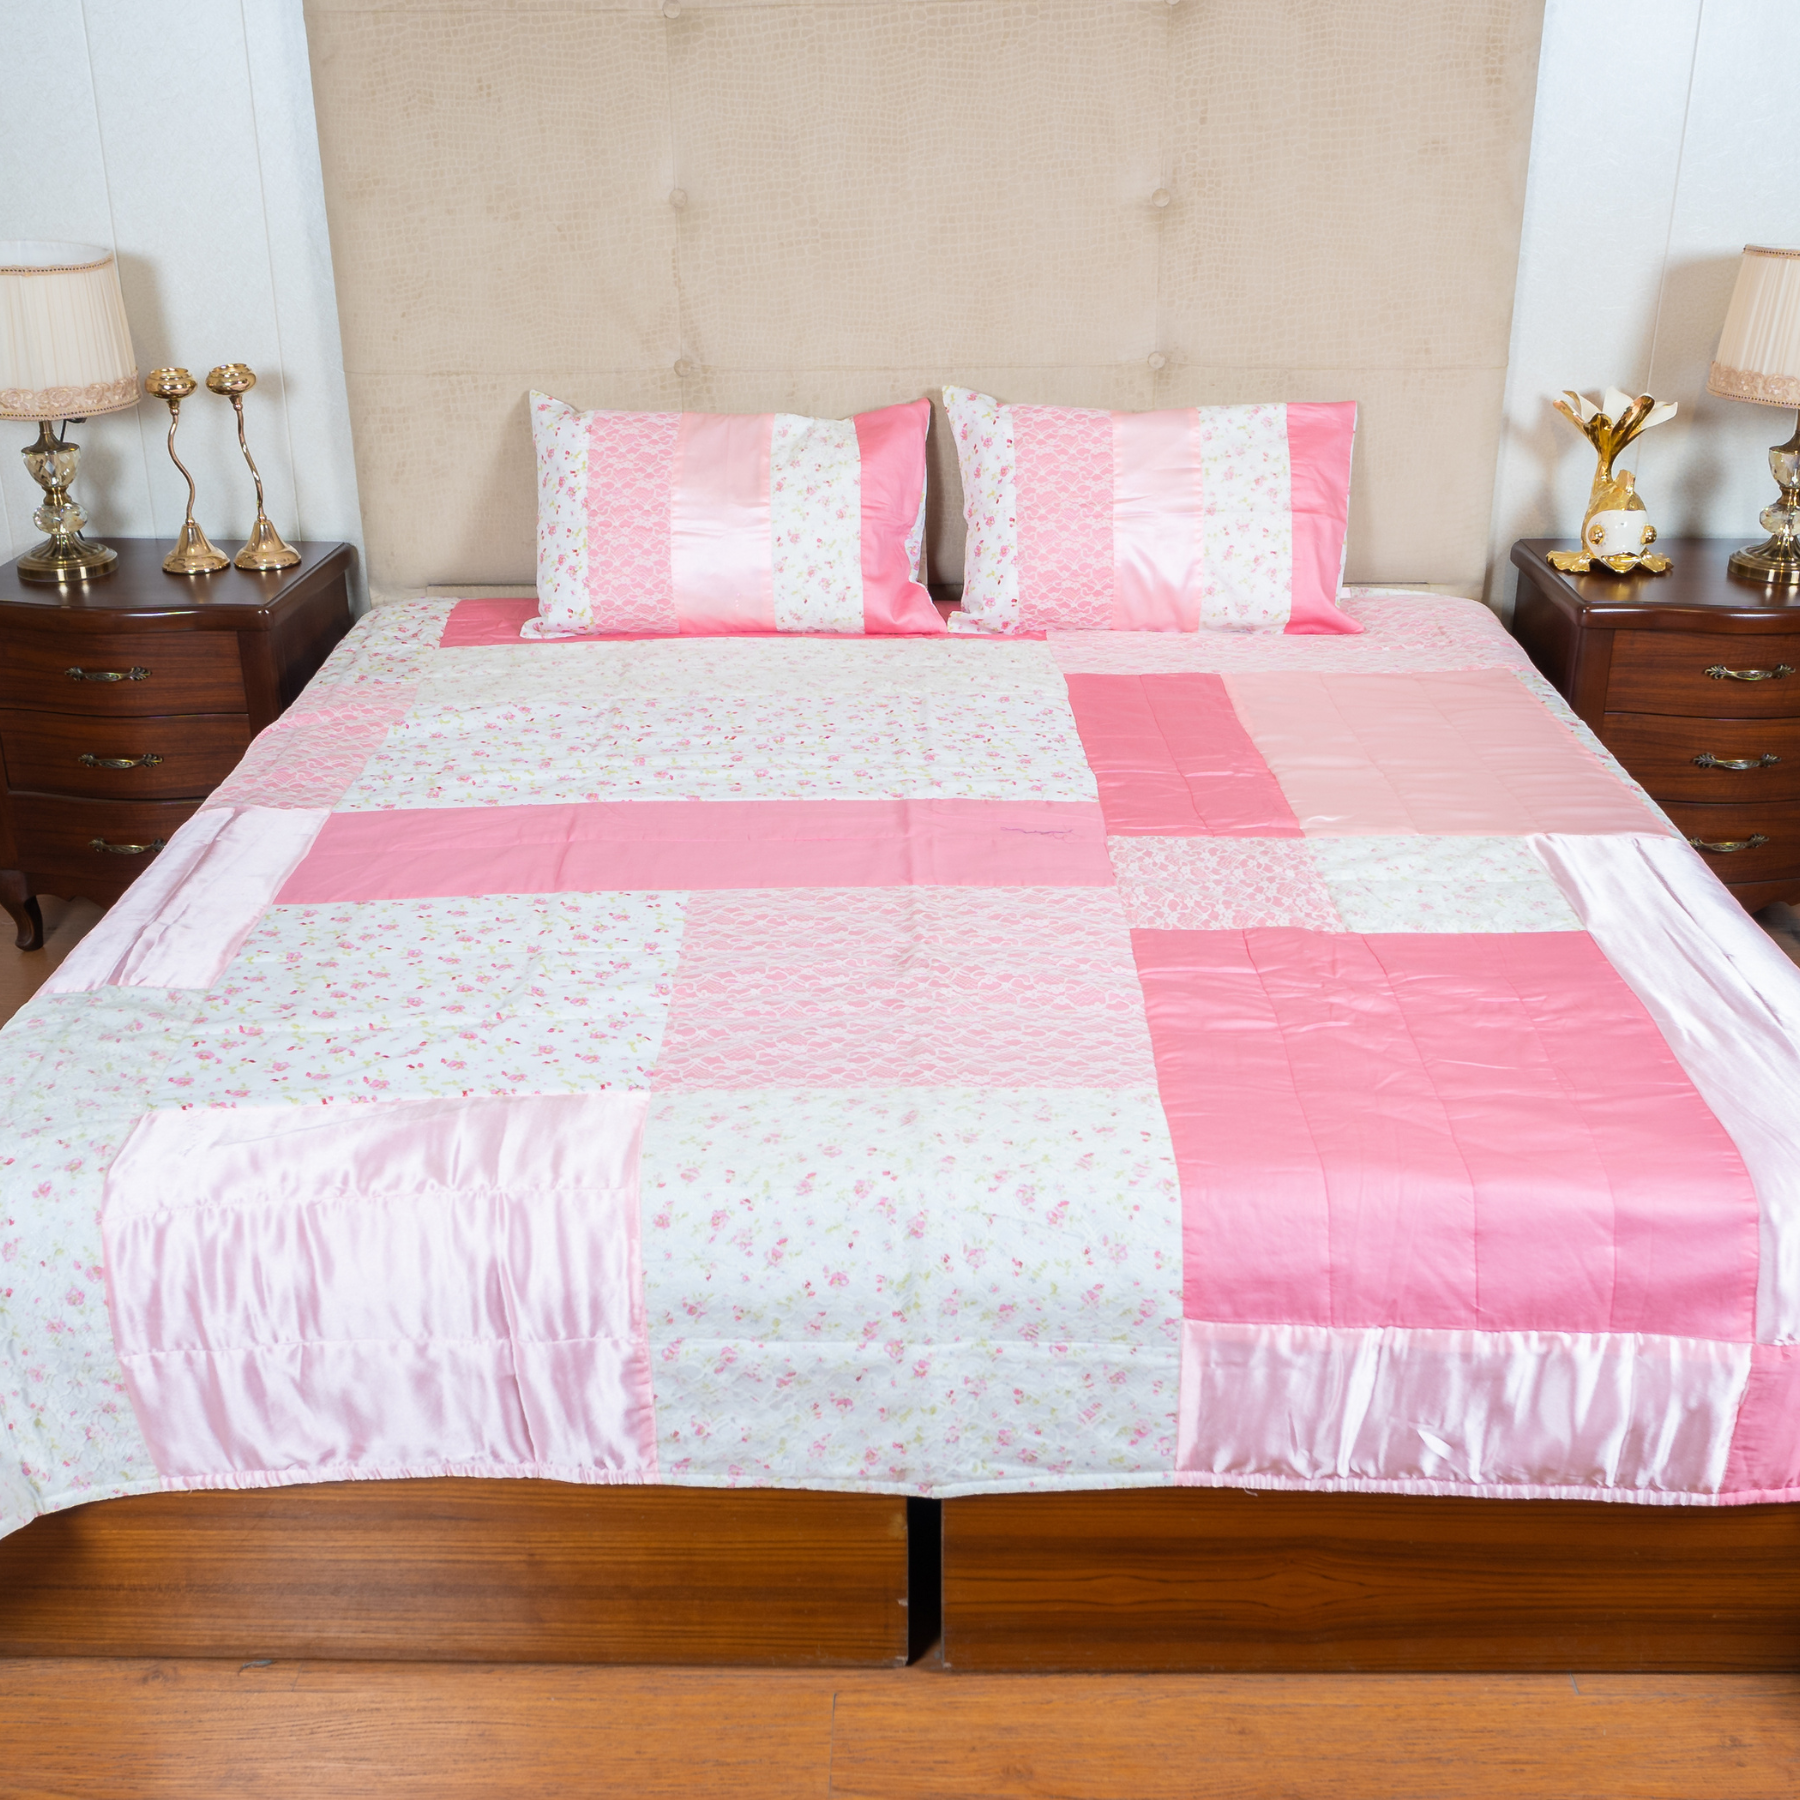 The LuxeLife Silk Bedcover